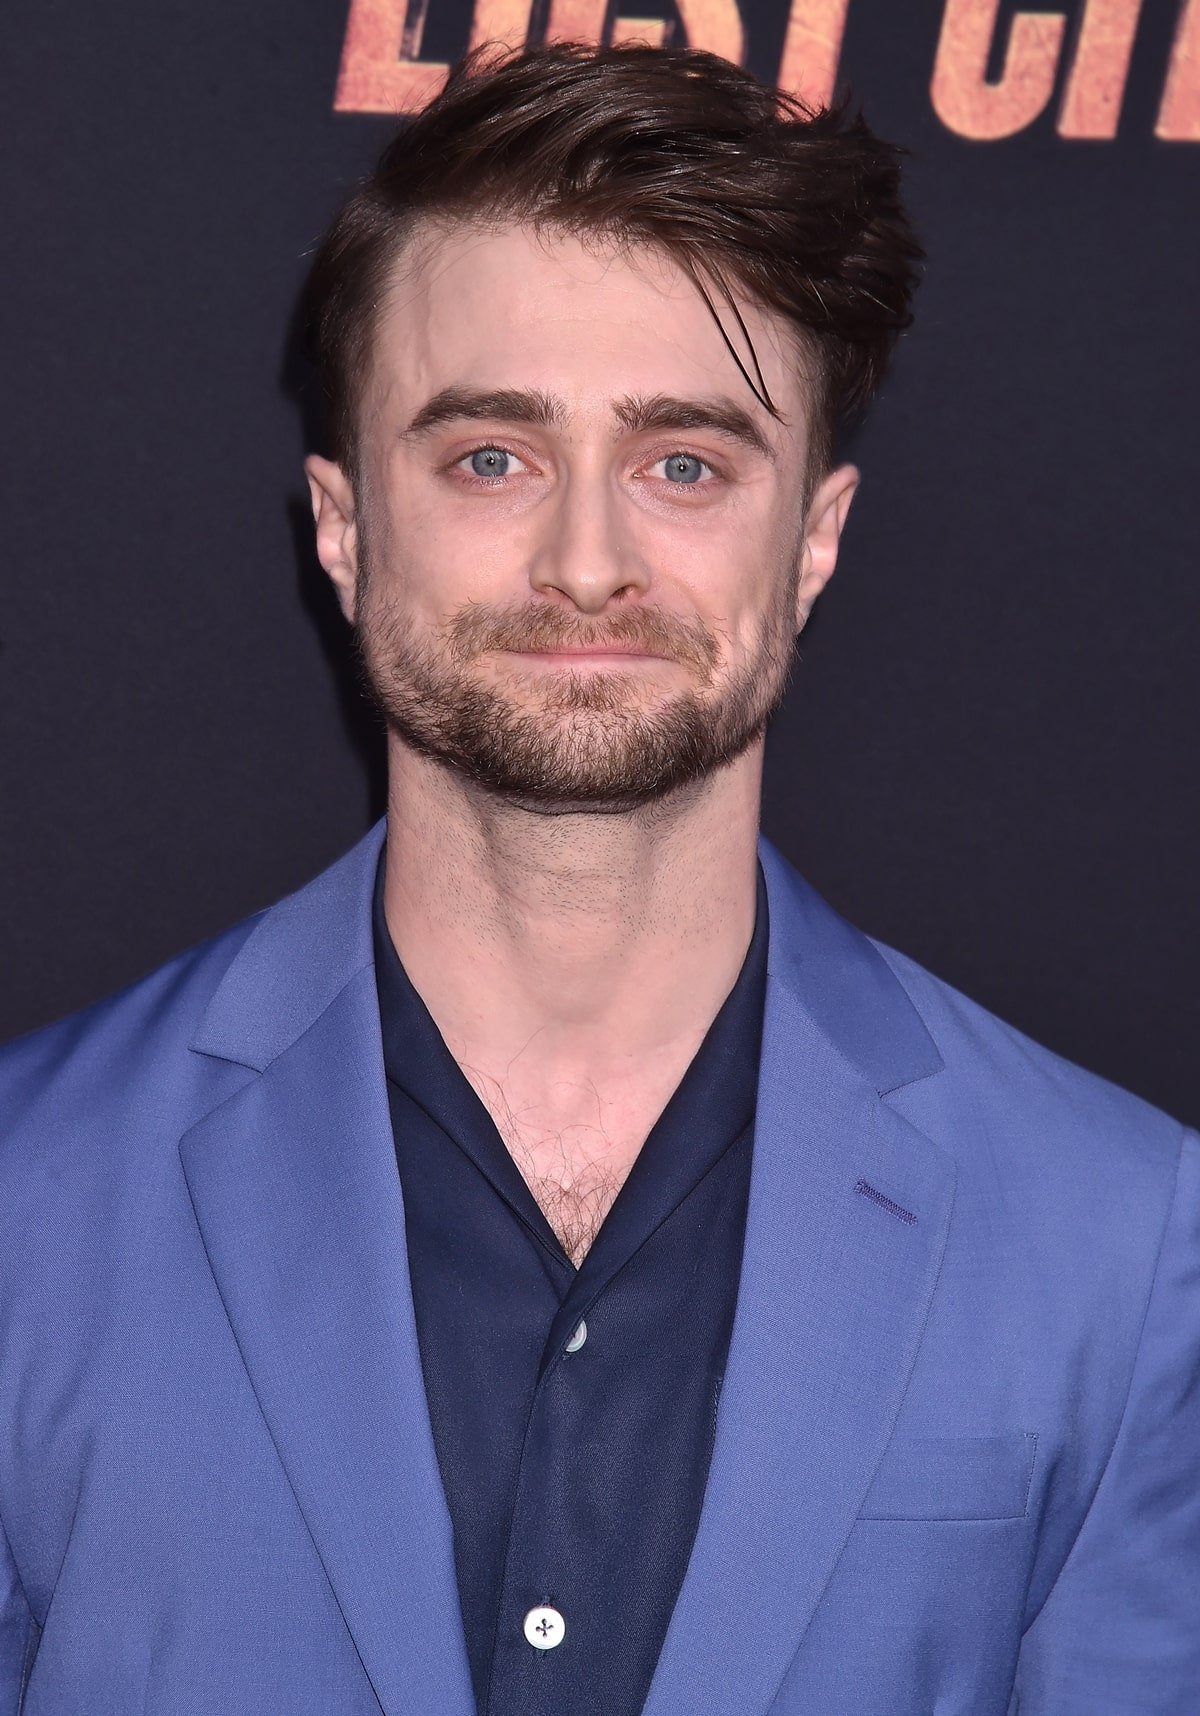 With more money than he'll ever need, Daniel Radcliffe knows he can do whatever he wants in terms of acting